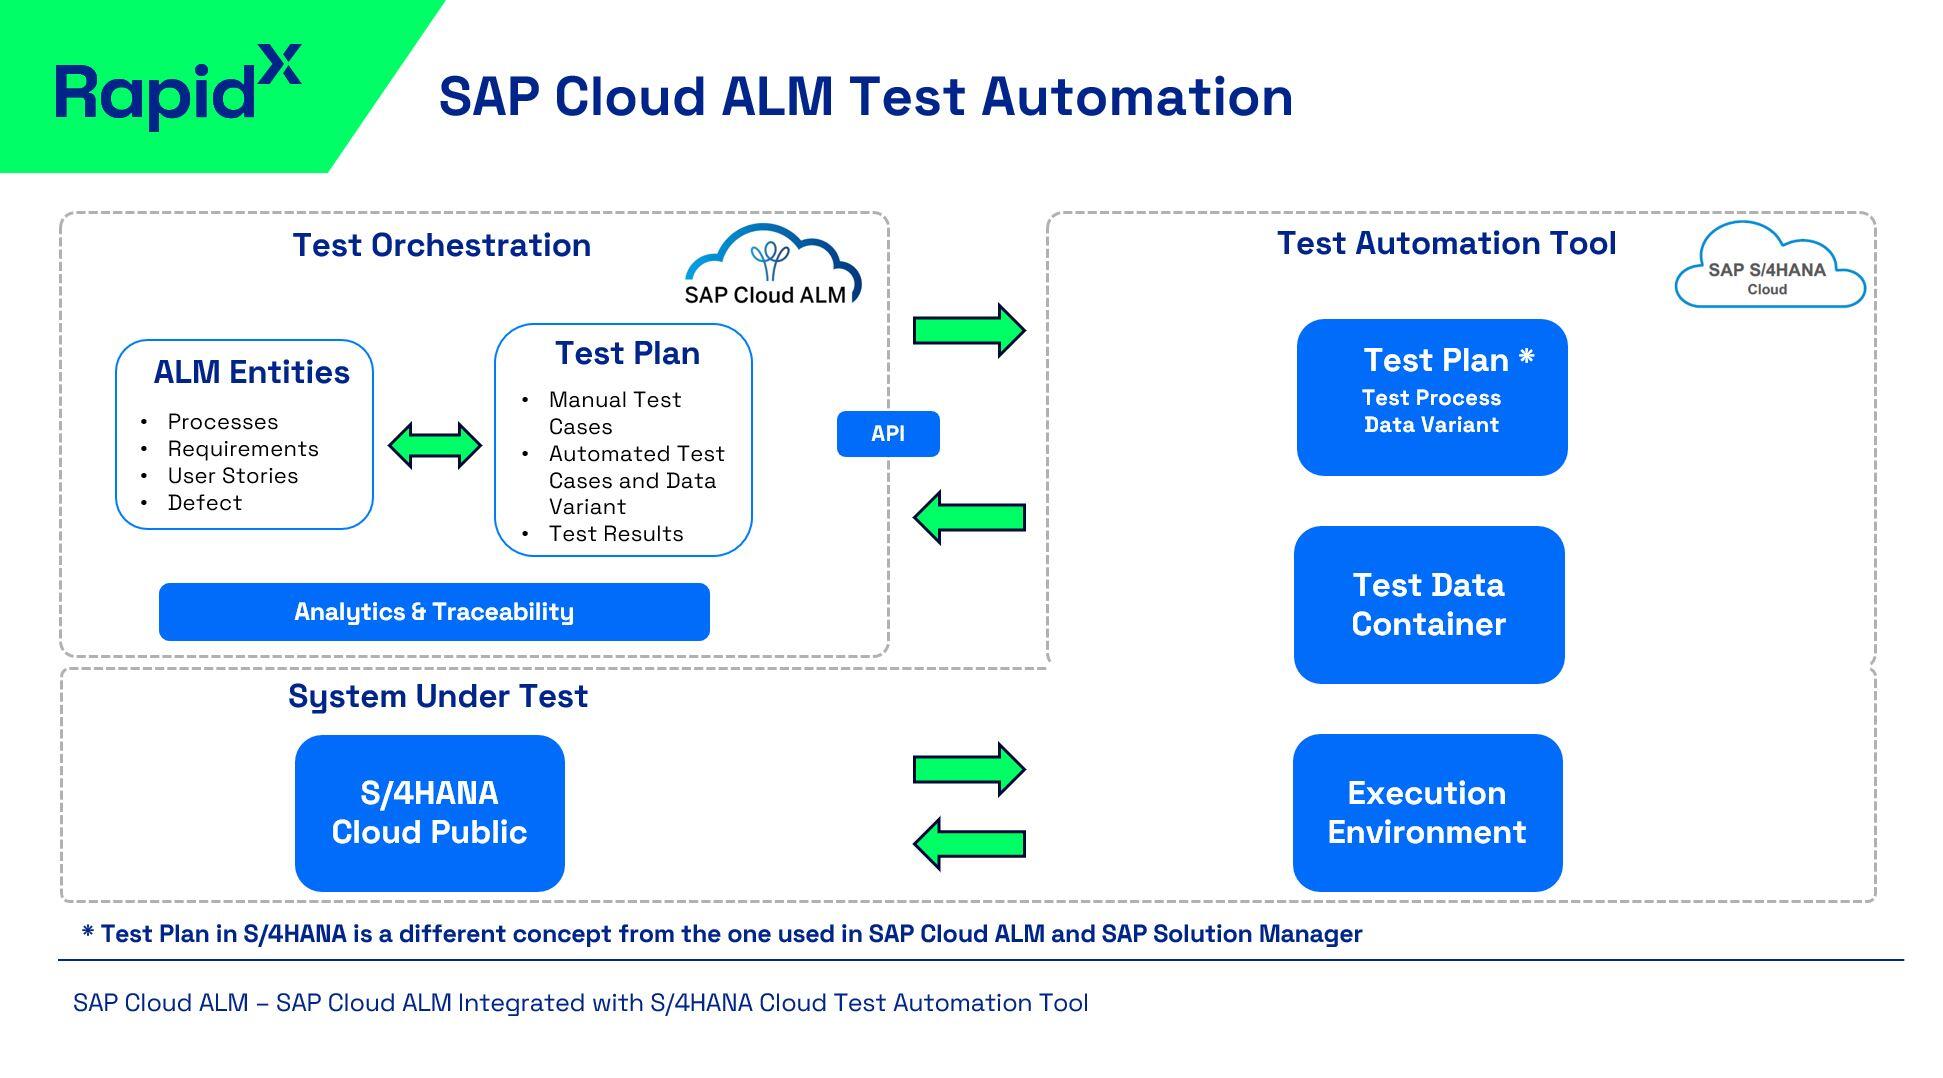 Test Capabilities integrated with S4HANA Cloud